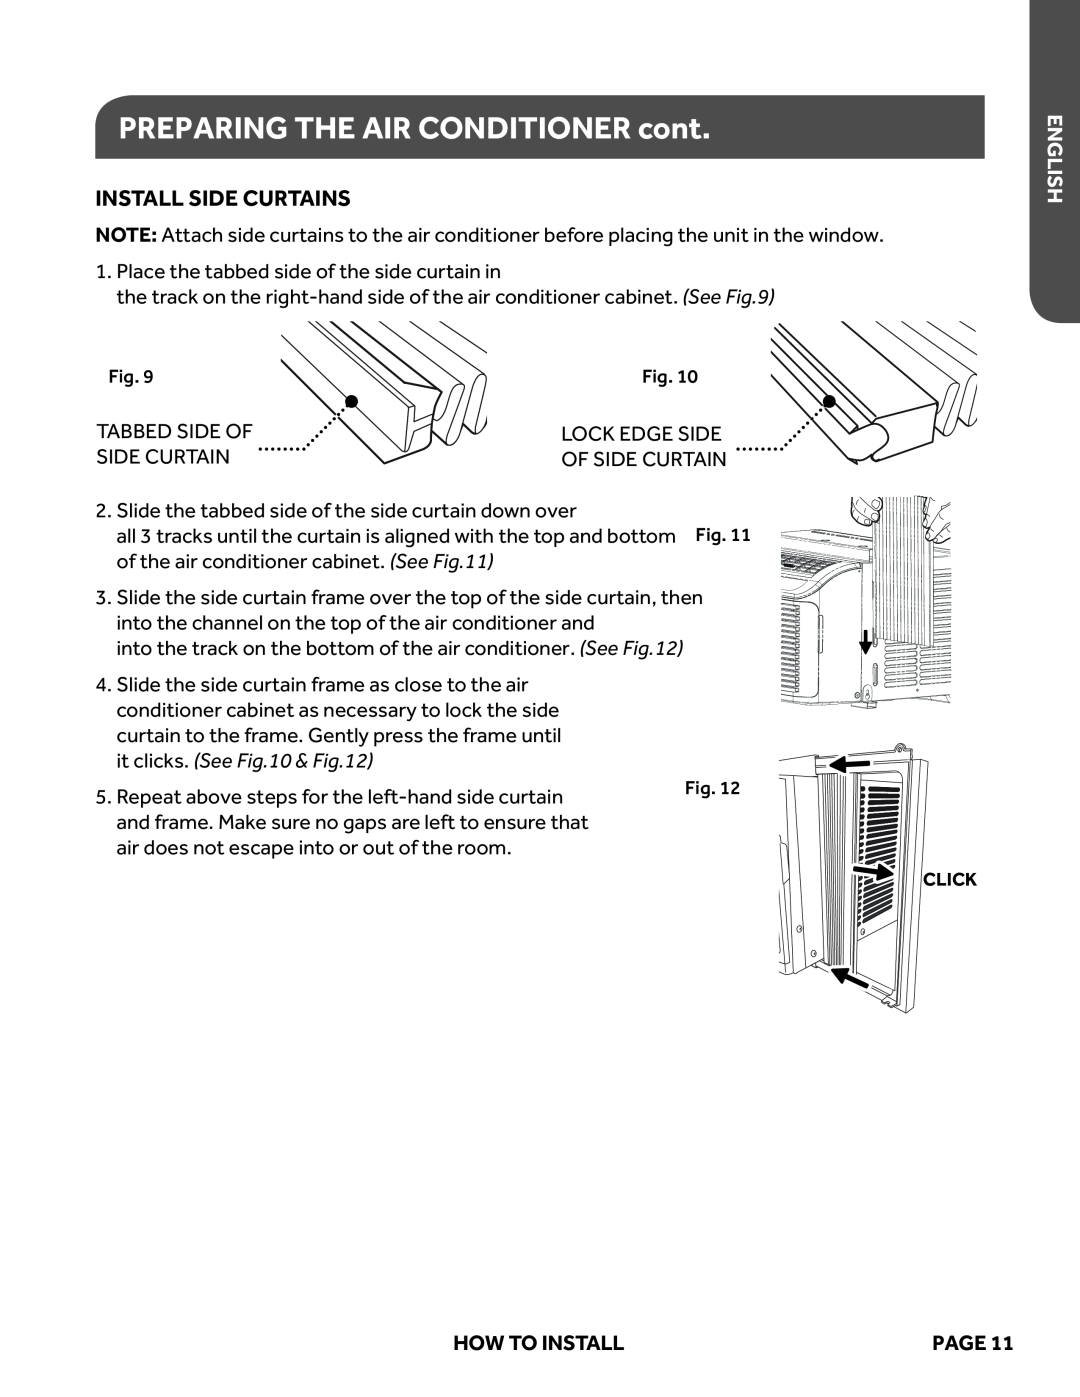 Haier ESAQ406P, ESAQ408P user manual PREPARING THE AIR CONDITIONER cont, Install Side Curtains, English, How To Install 